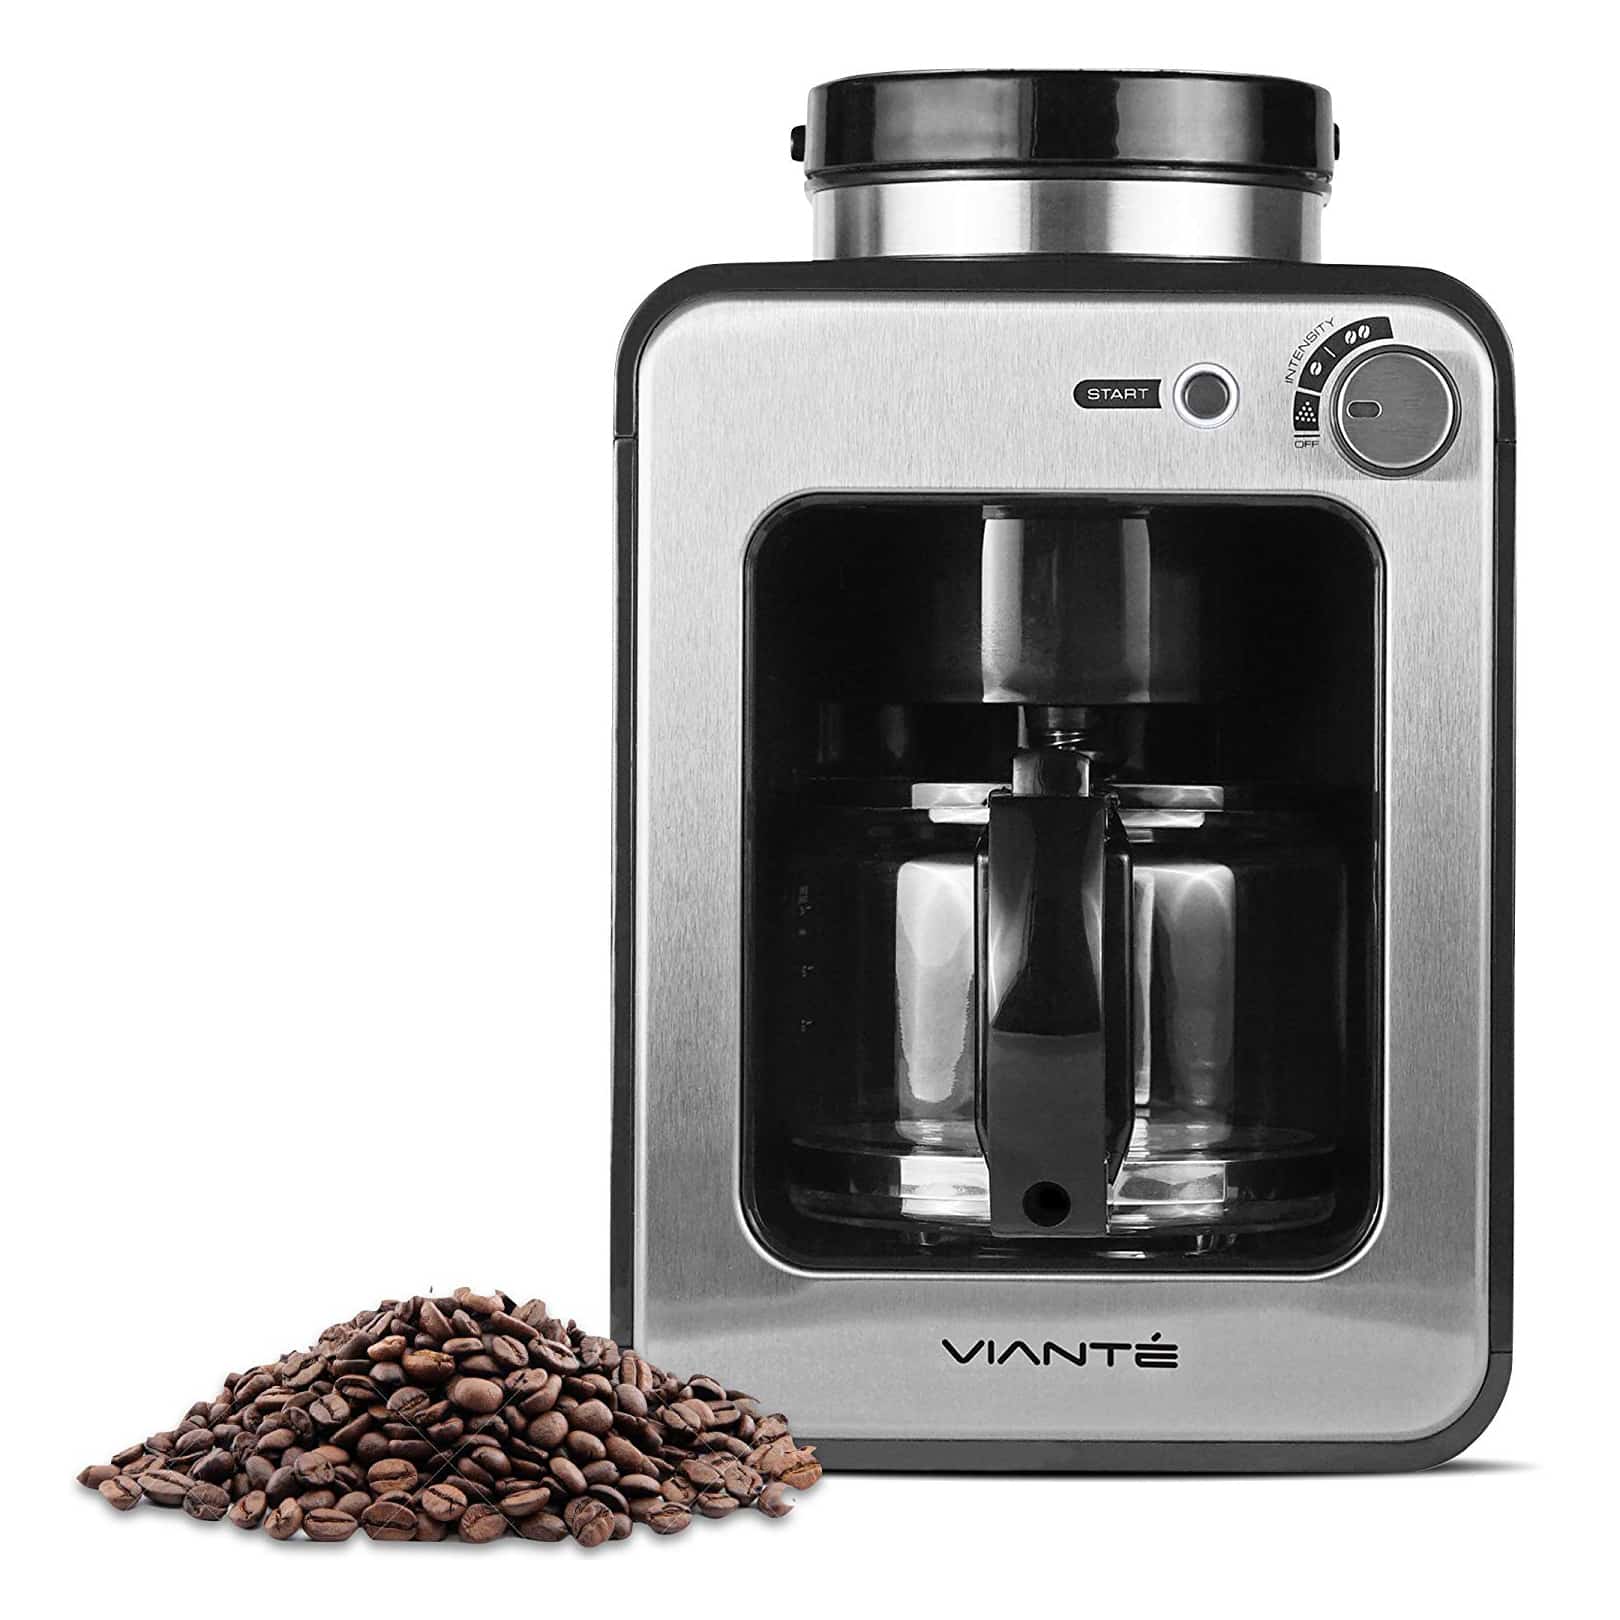 Top 10 Best Coffee Maker with Grinders in 2021 Reviews | Buyer's Guide